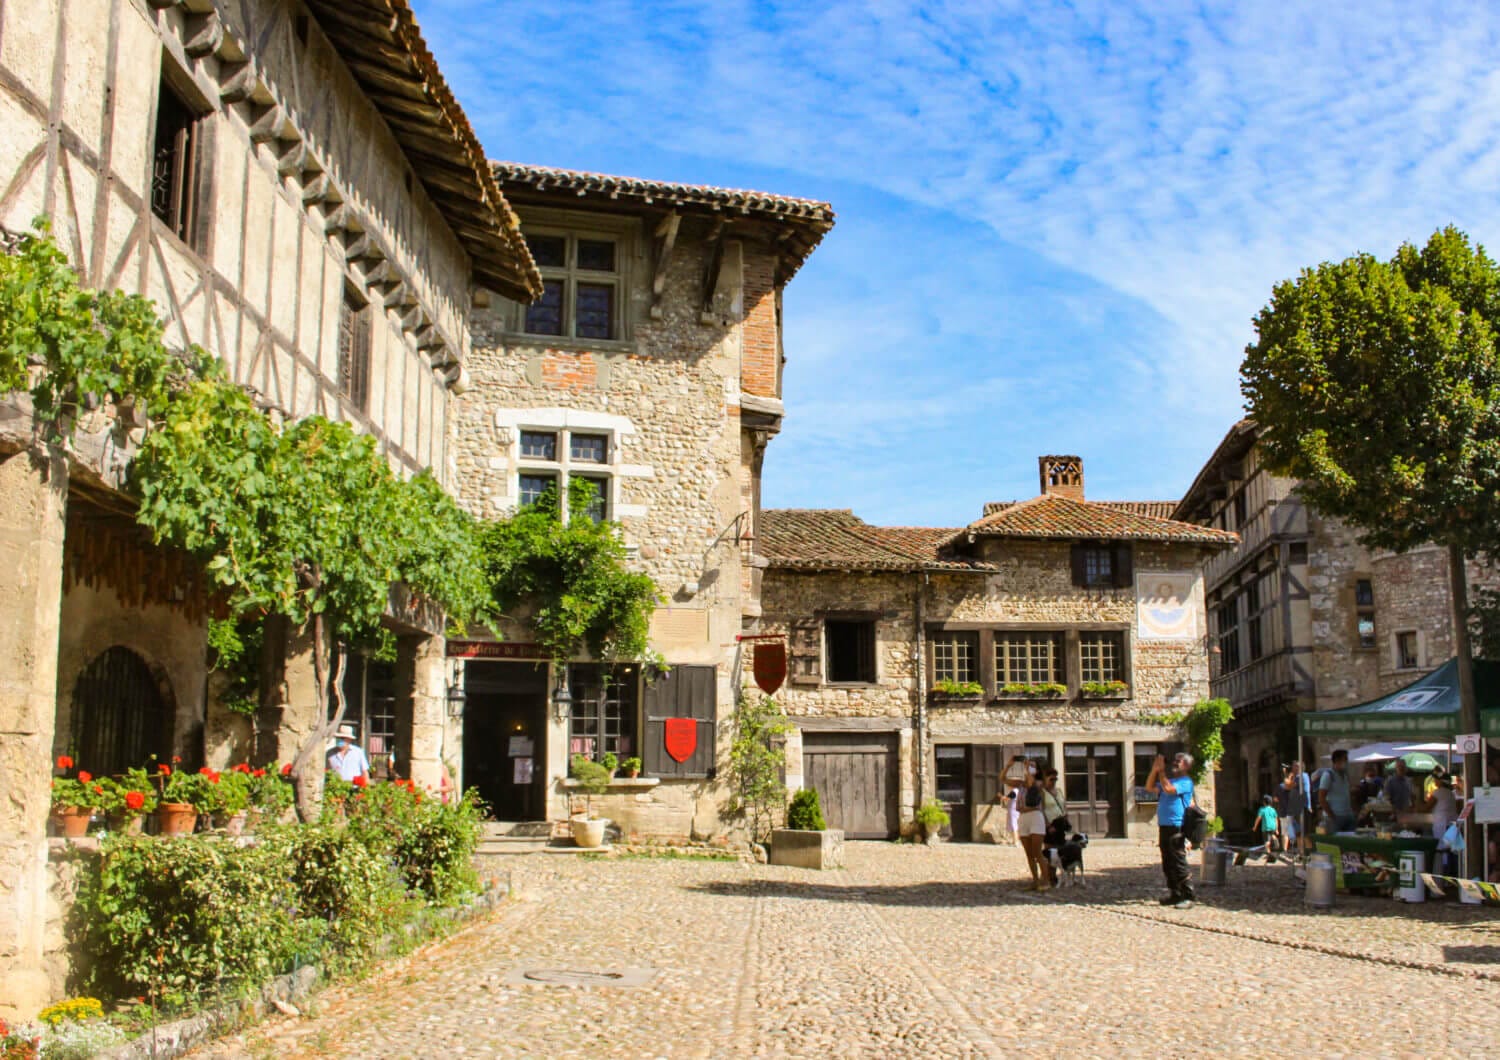 Pérouges - Photo Wikimedia Commons by Marilou Perino